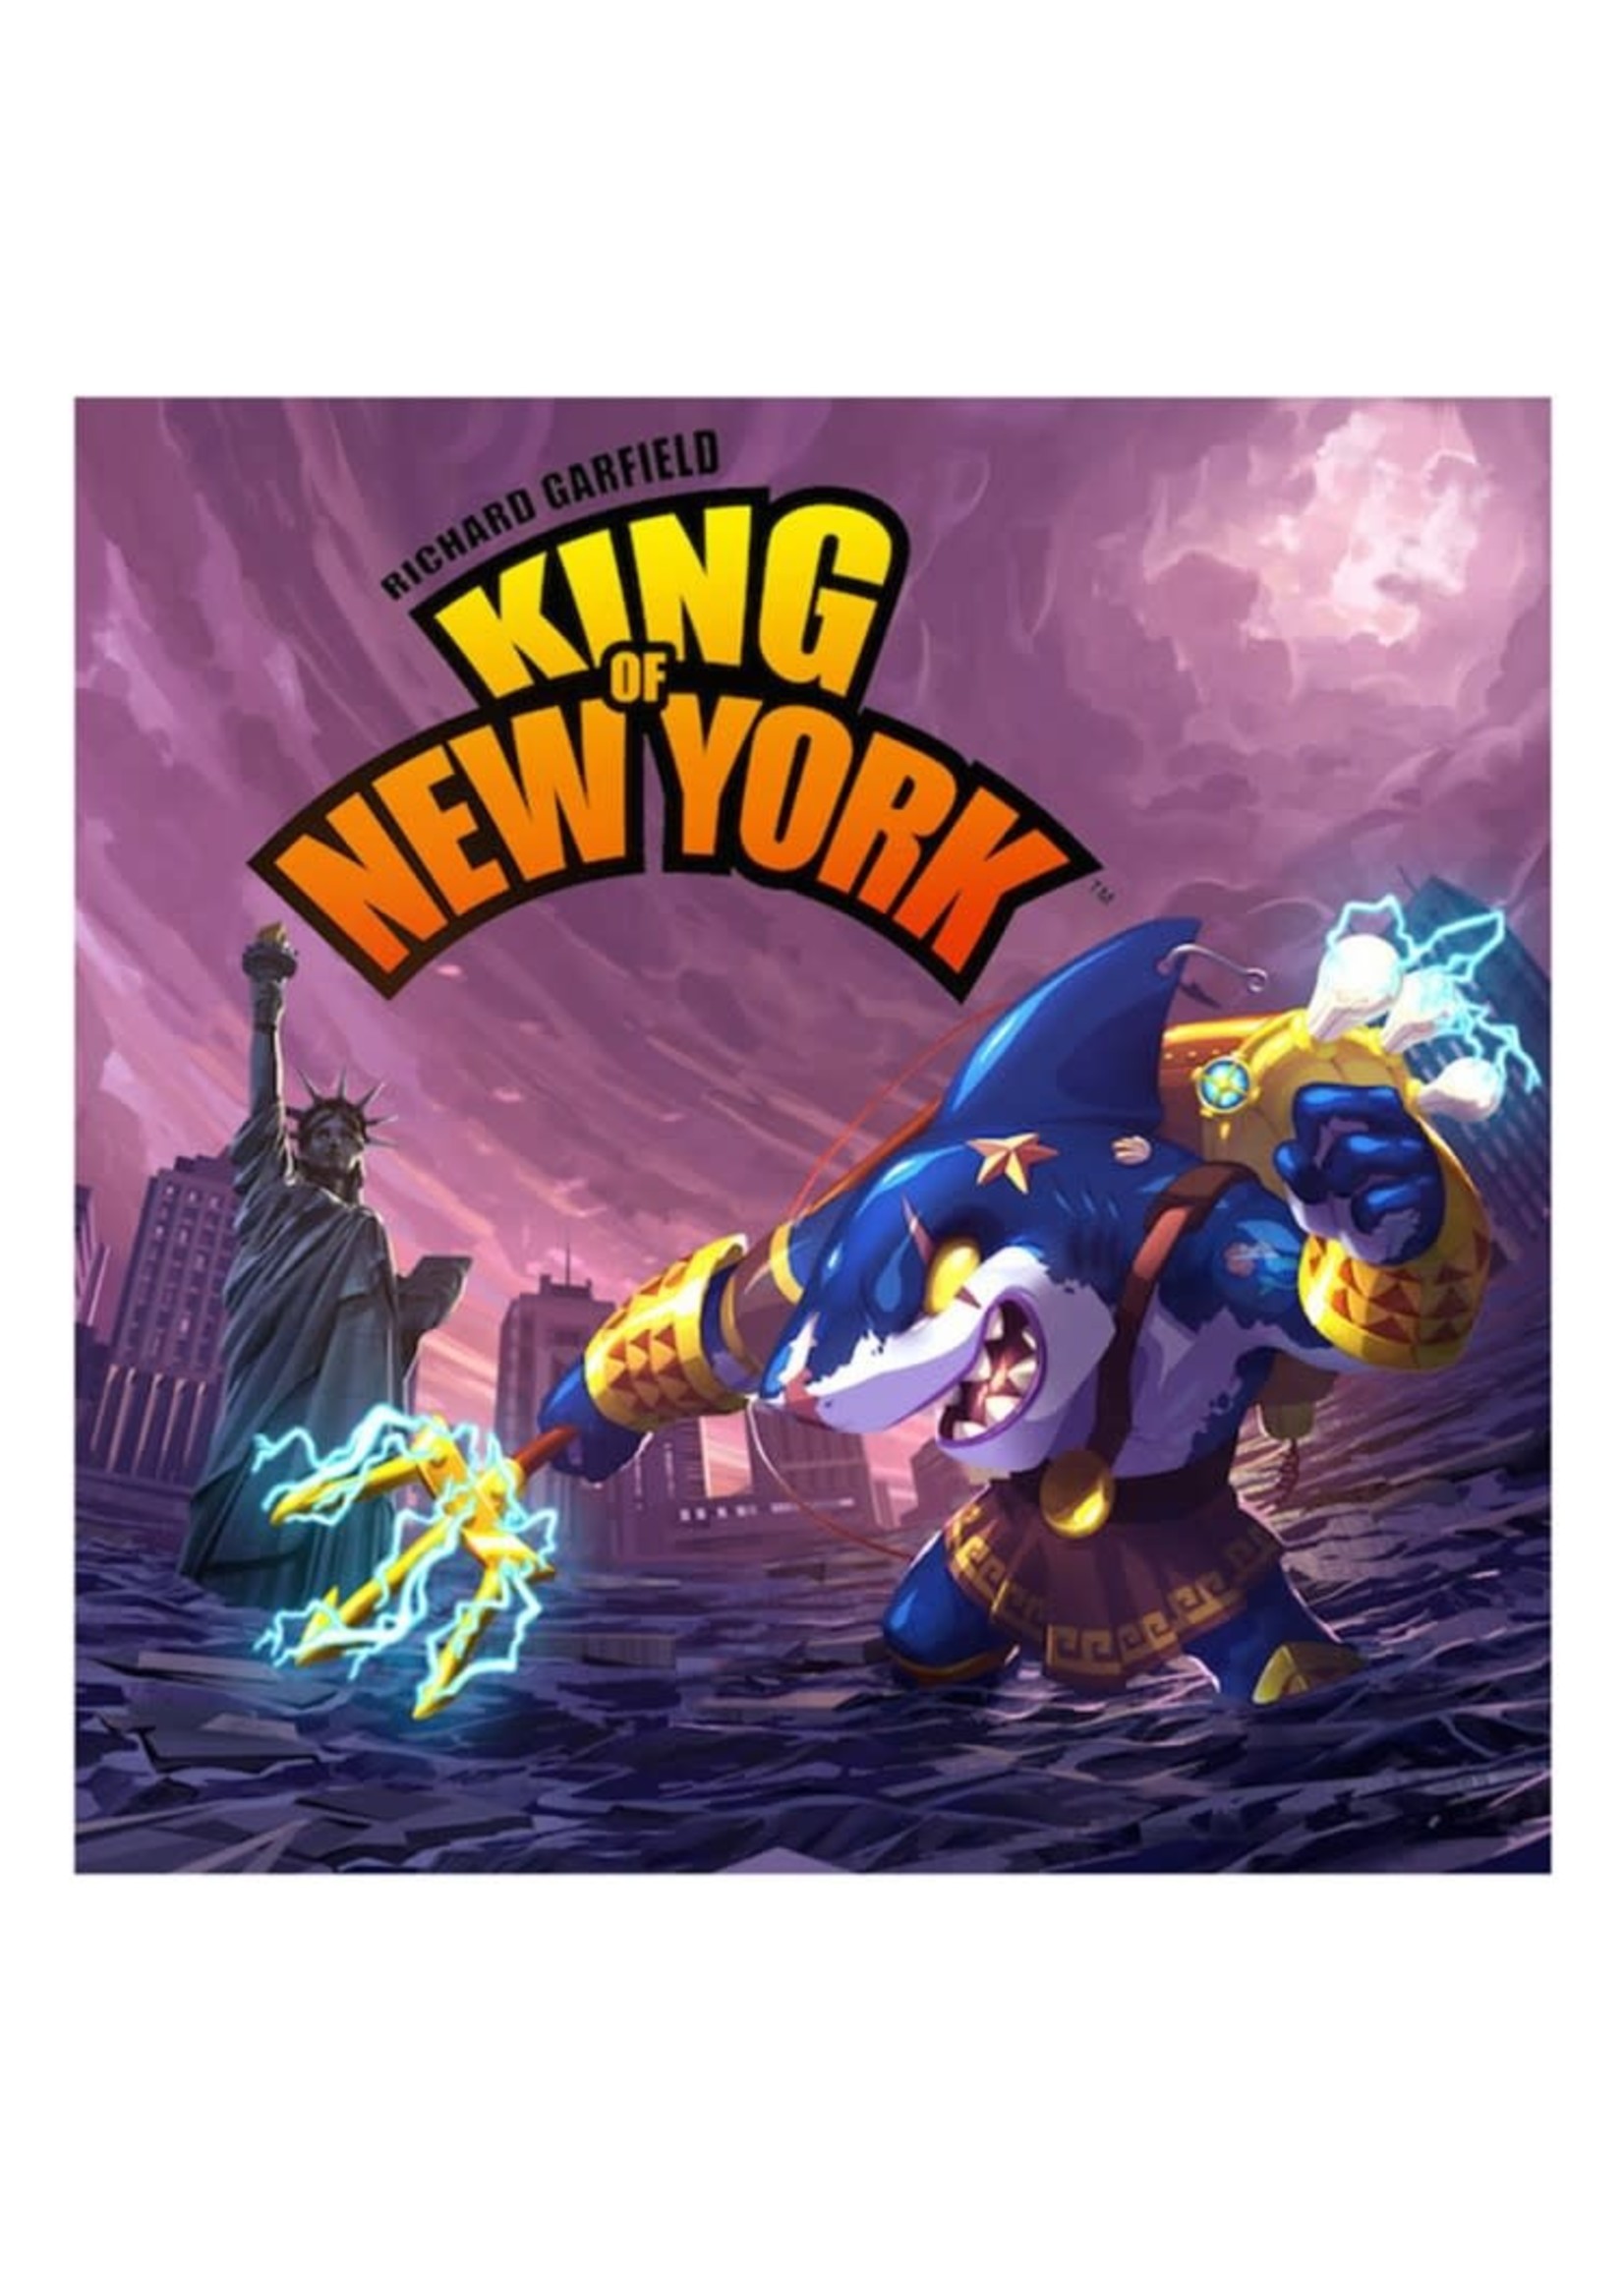 Iello King of New York Power Up